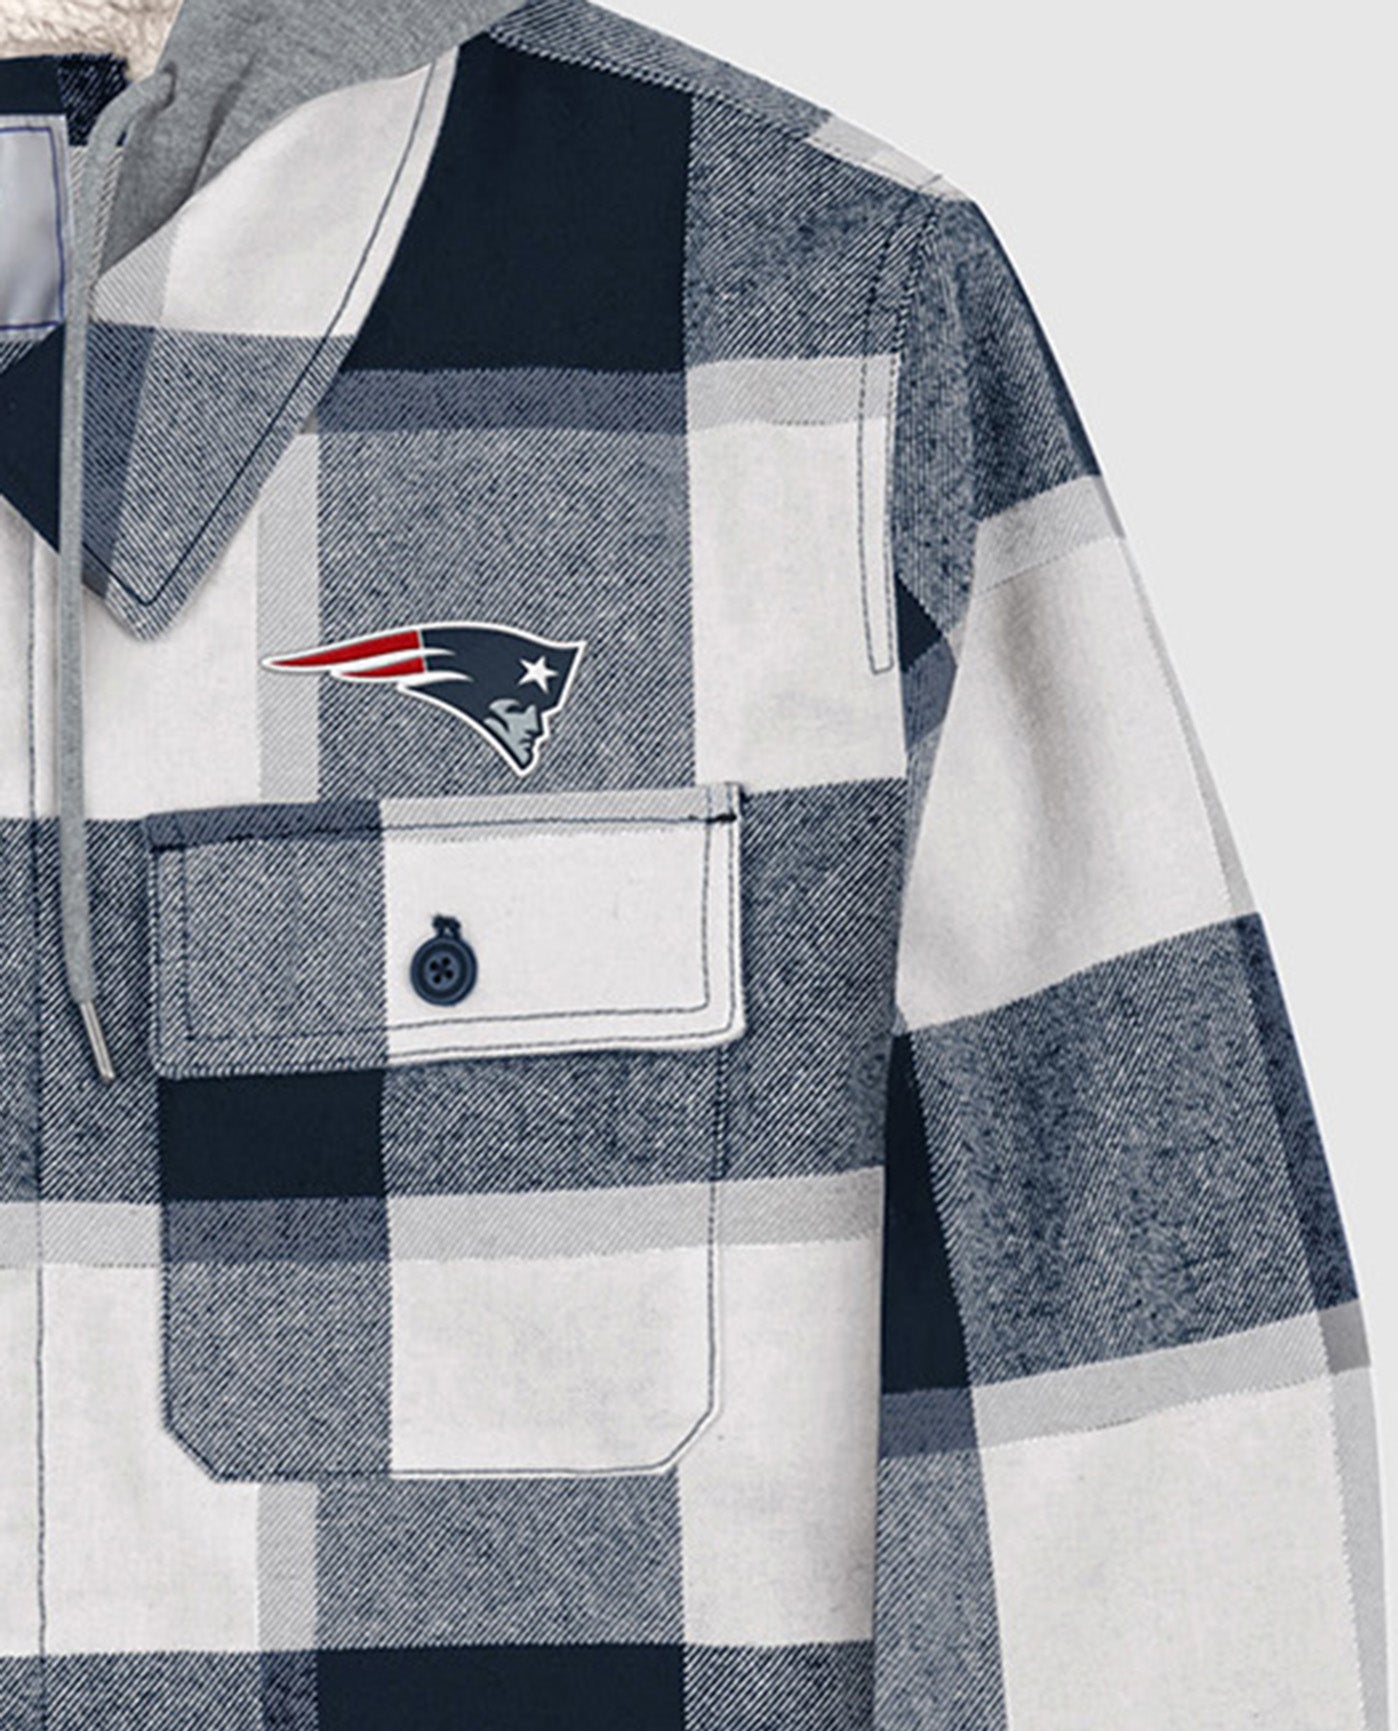 Logo On Chest Of New England Patriots The Big Joe Sherpa Lined Plaid Jacket | Navy